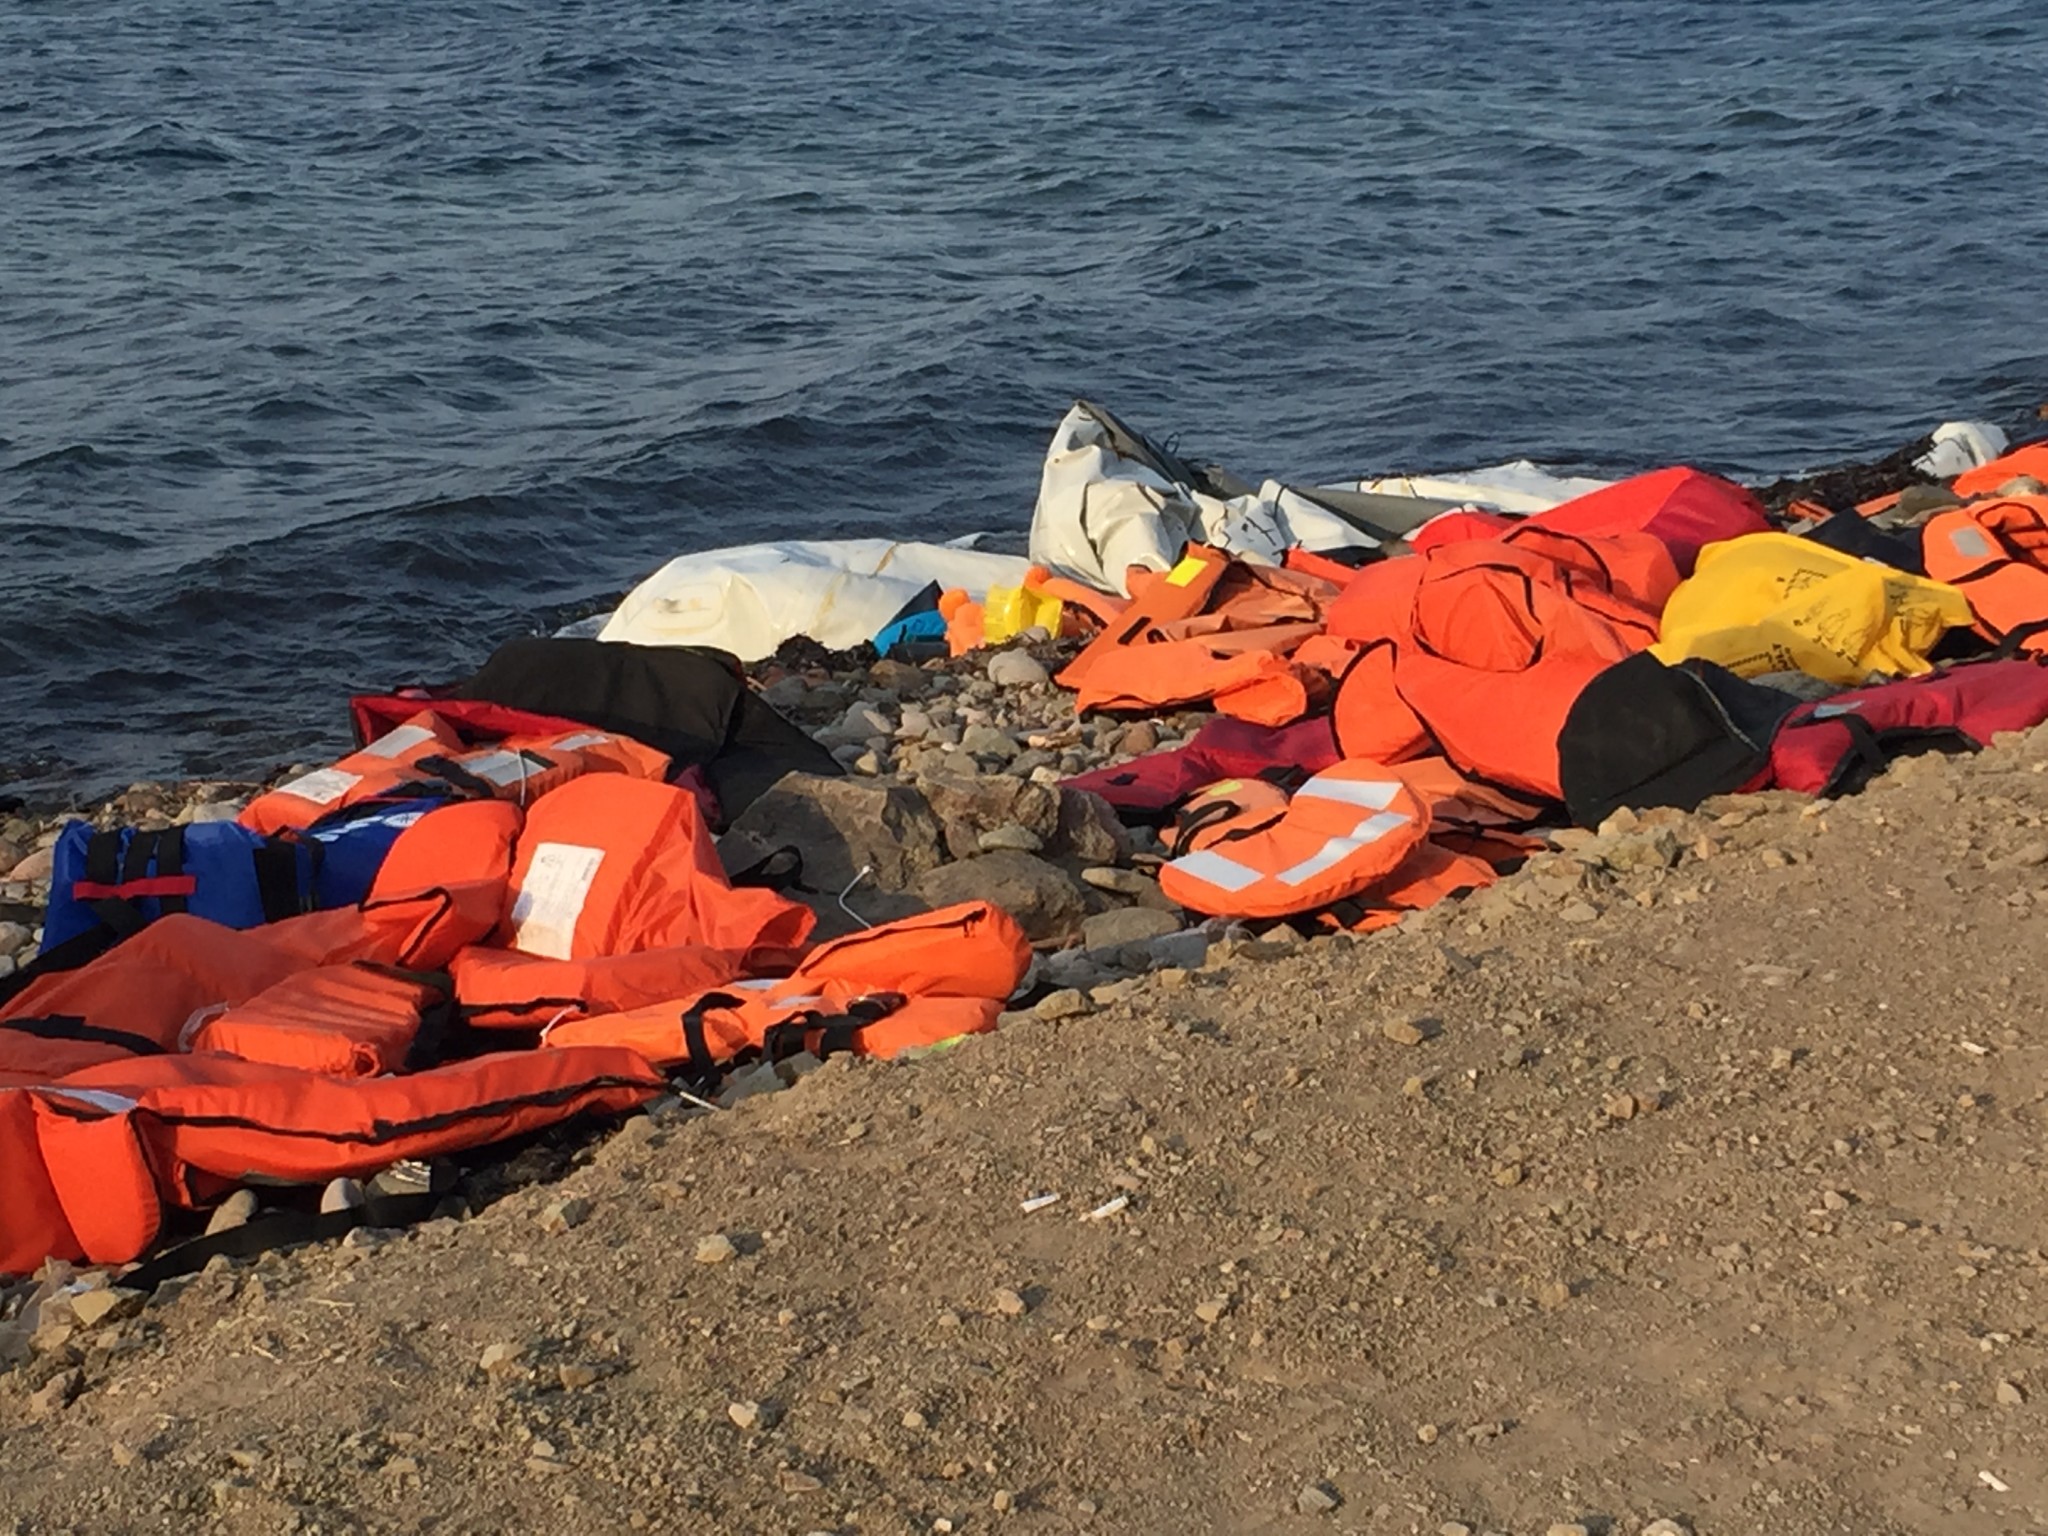 Protection deferred, protection denied? Report from Lesvos, Greece, European Union